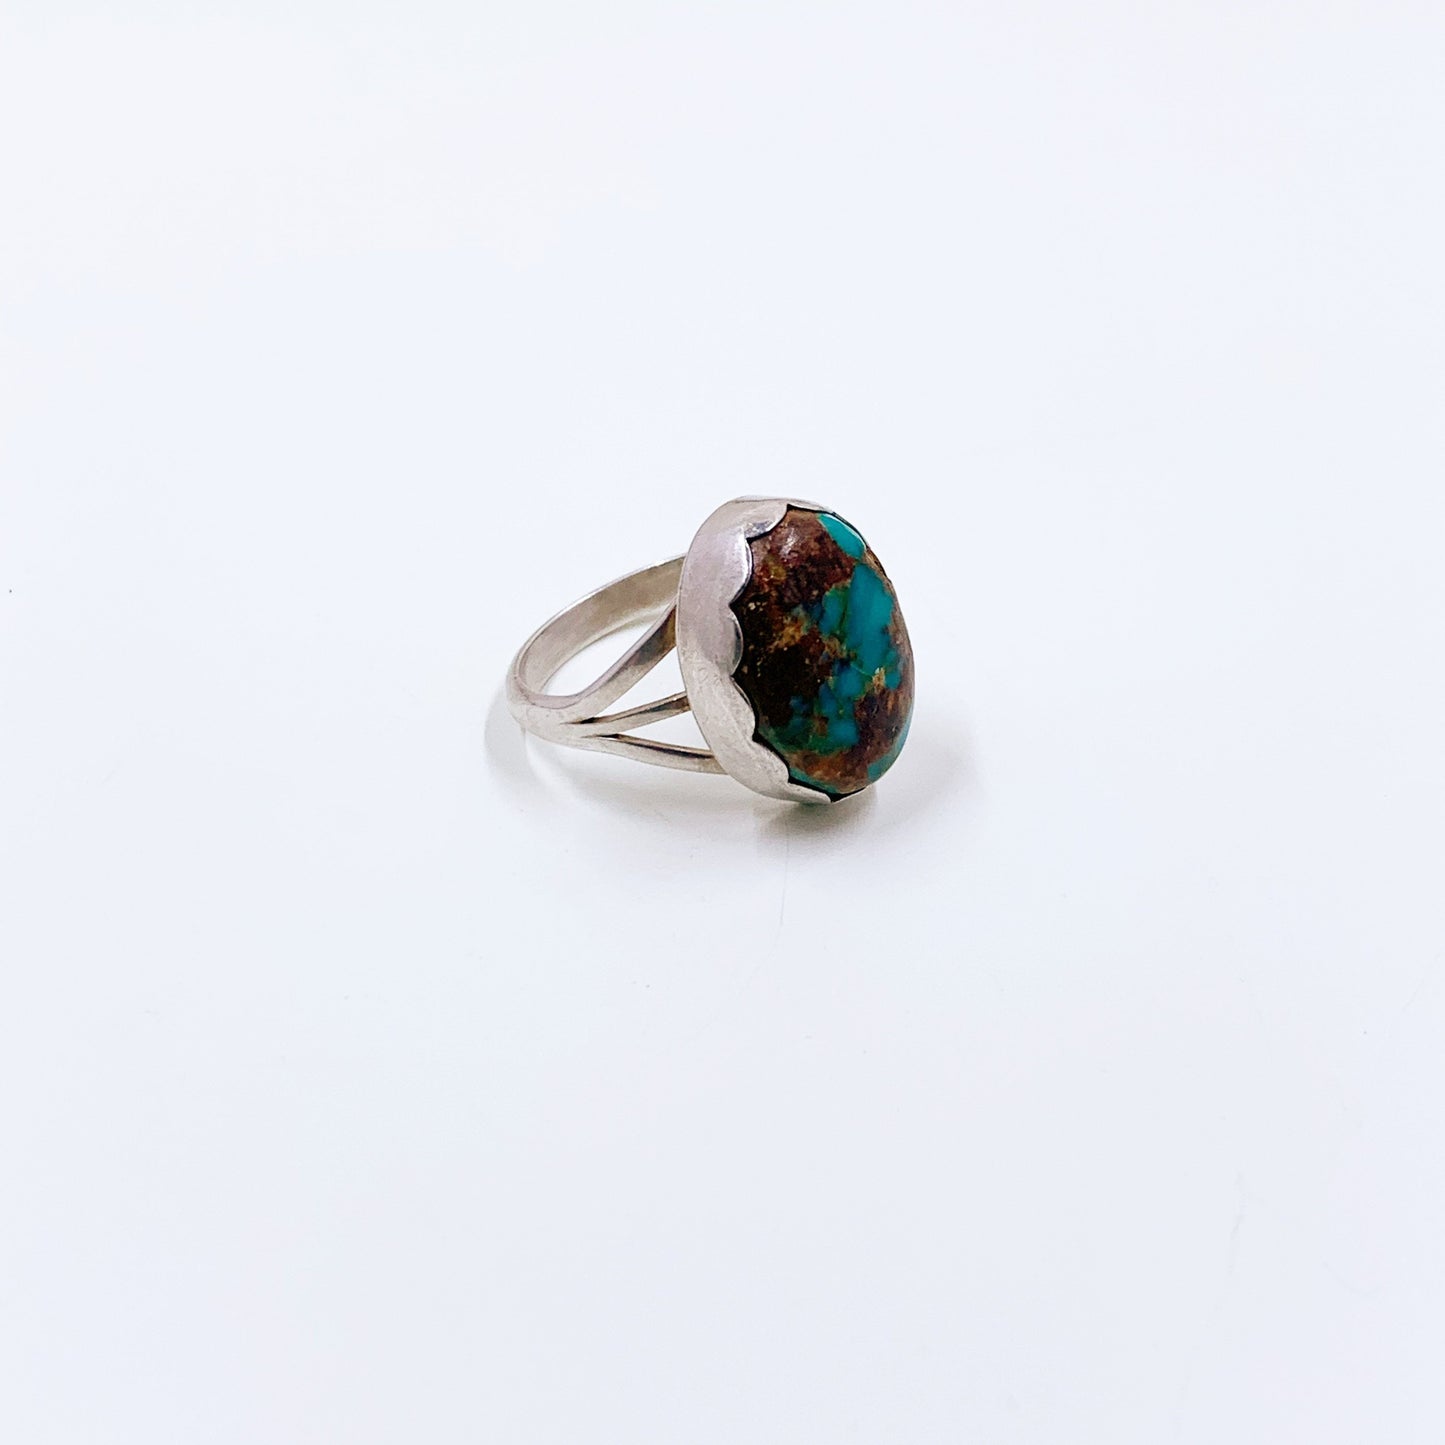 Vintage Silver Turquoise Ring | Silver Southwest Turquoise Ring | Size 7 1/4 Ring